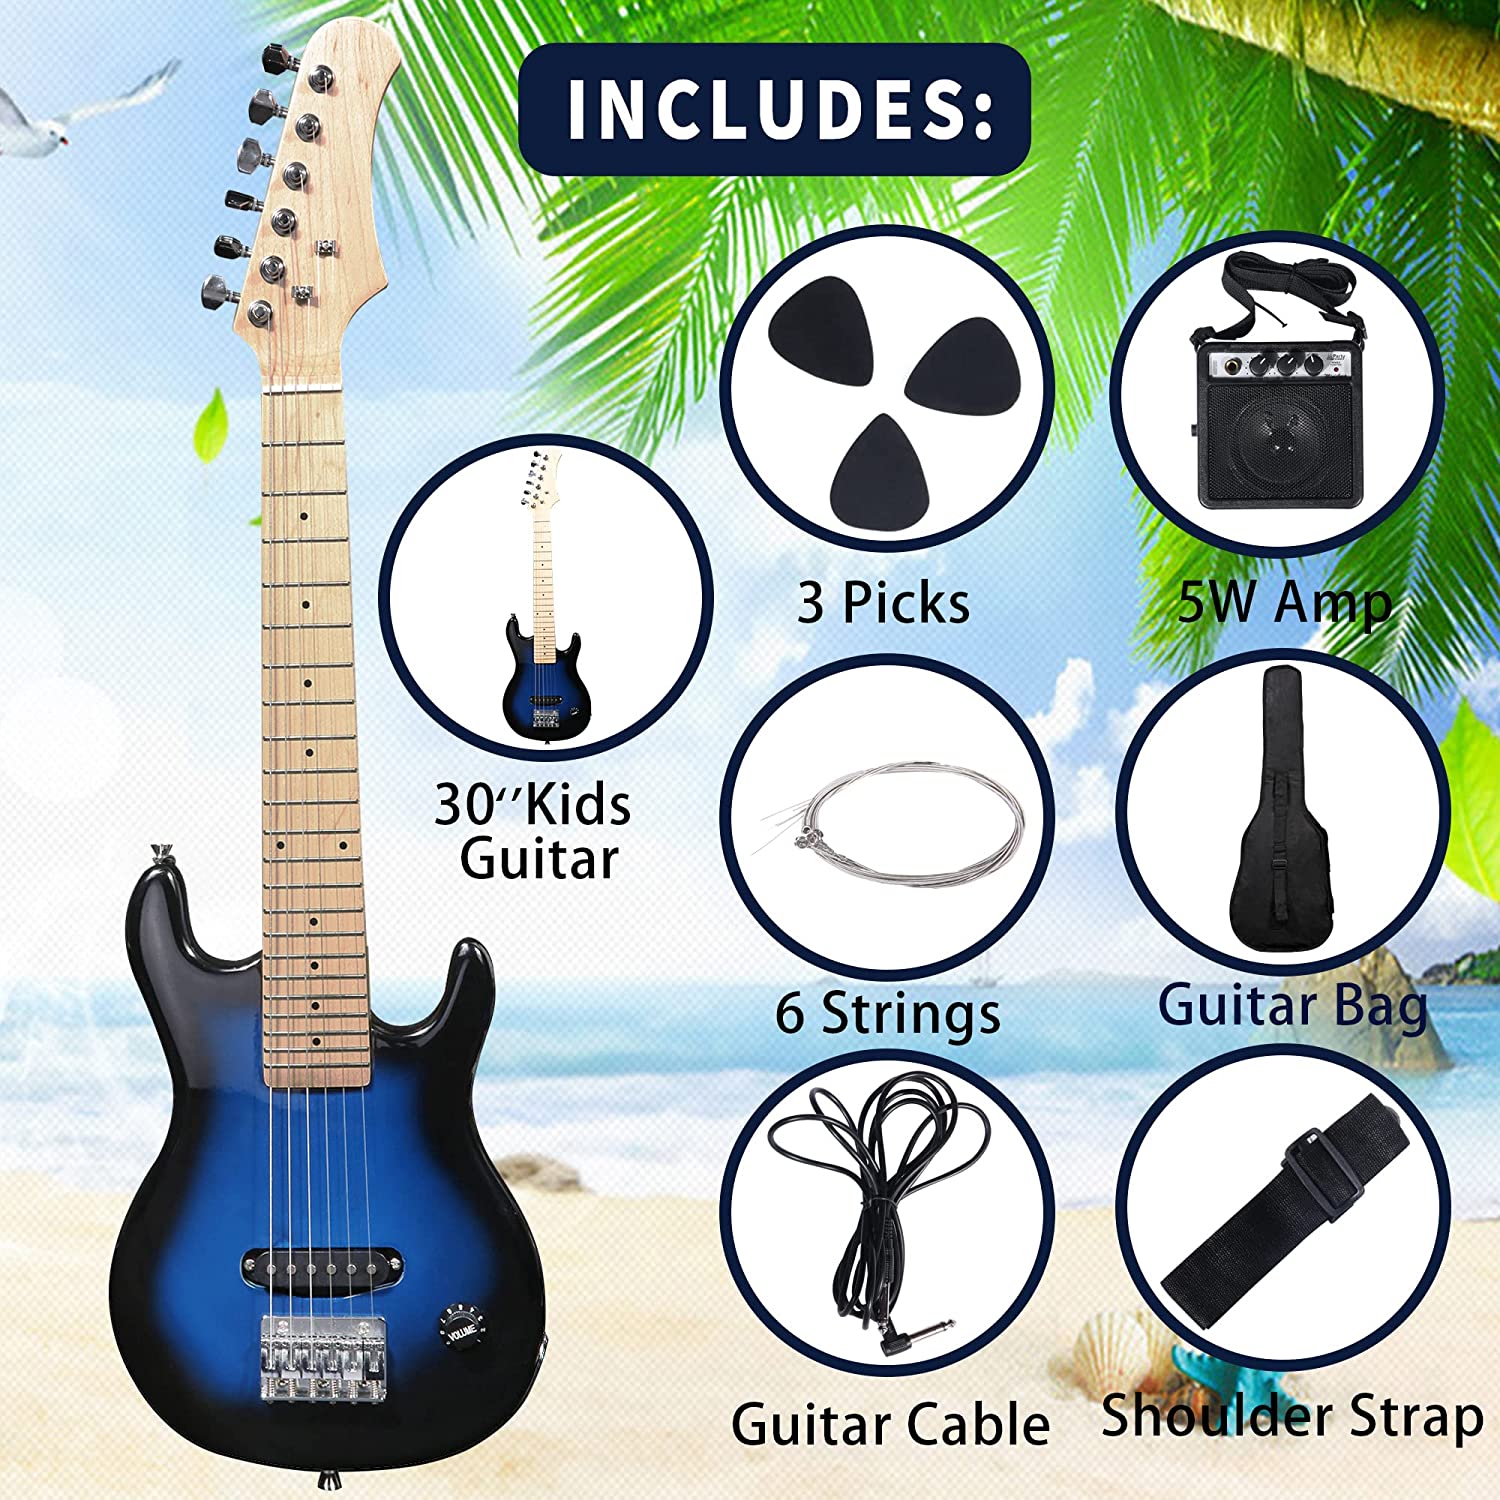 30" Electric Guitar Beginner Kits for Starter Guitar Includes Gig Bag, 5 W Amplifier, 6 Strings, Picks, Cable